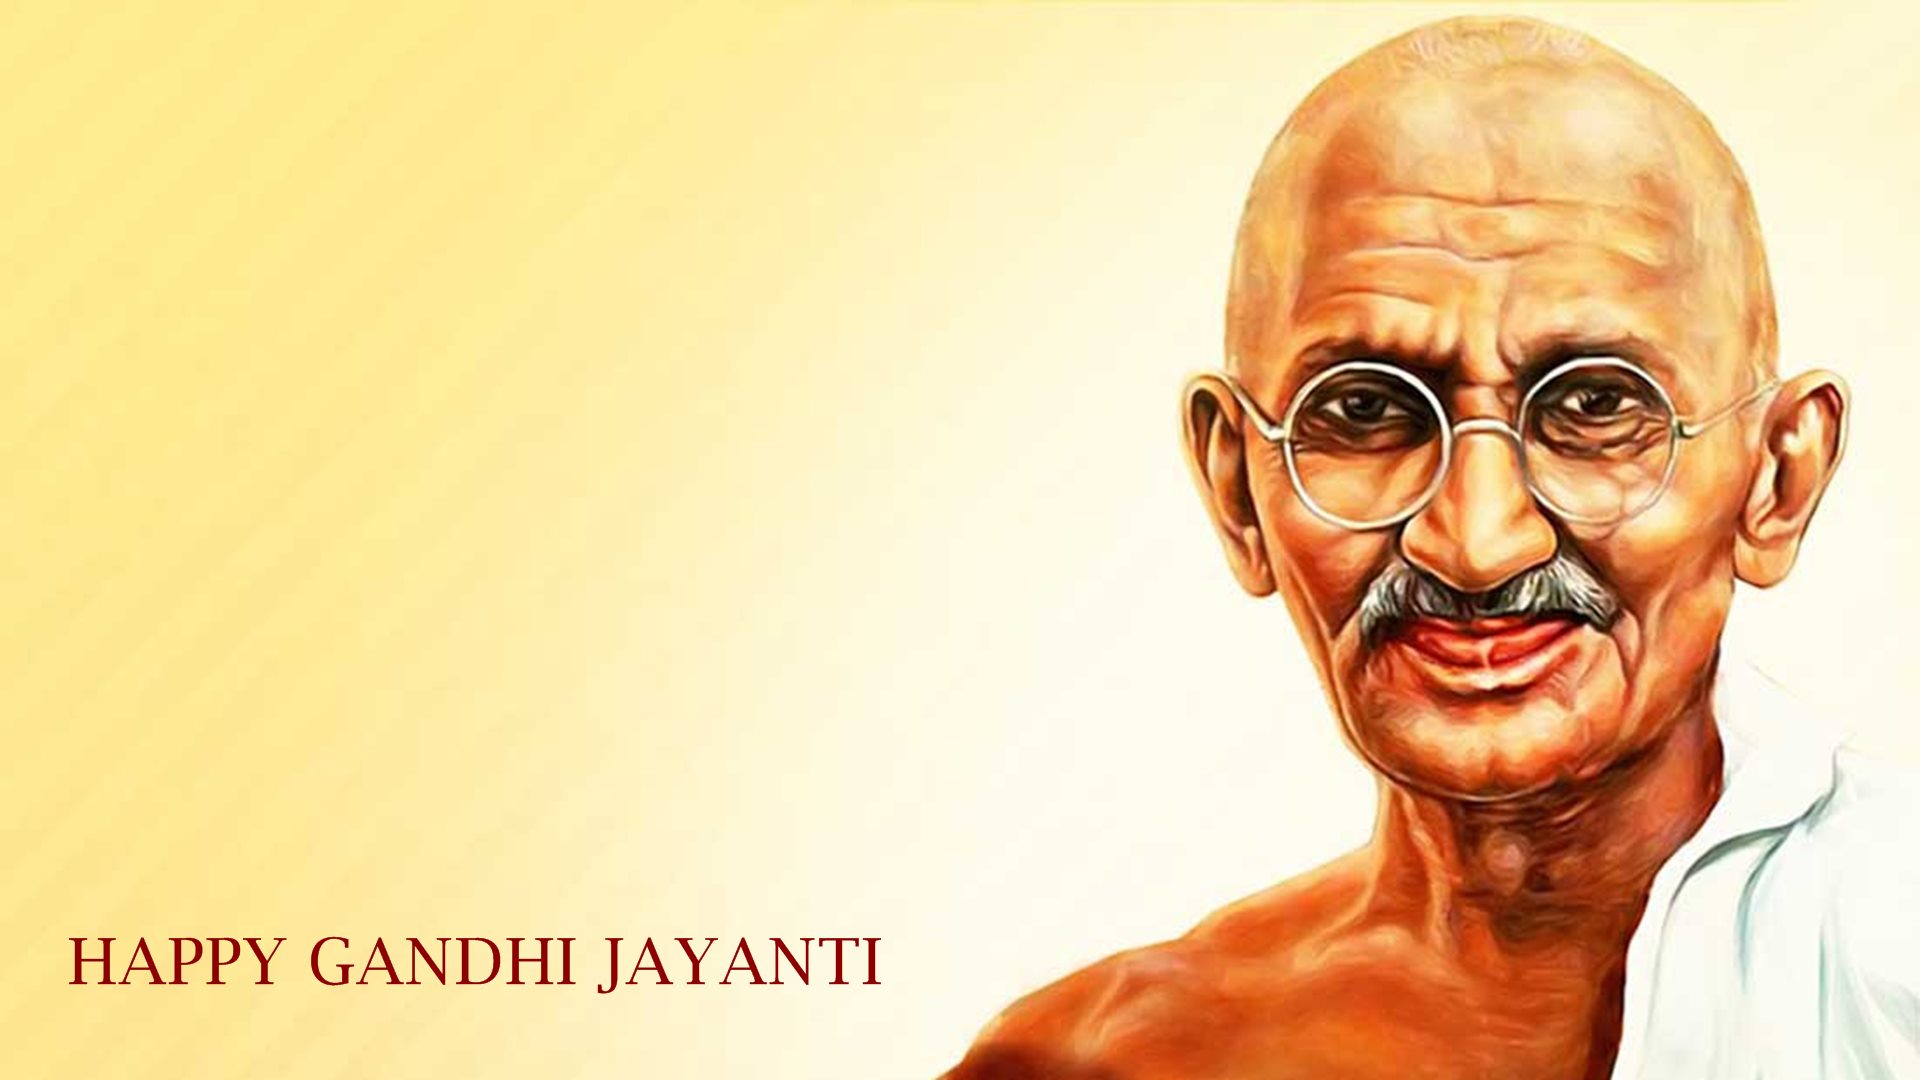 Happy Gandhi Jayanthi Images, Quotes by Father of Nation [Mohandas